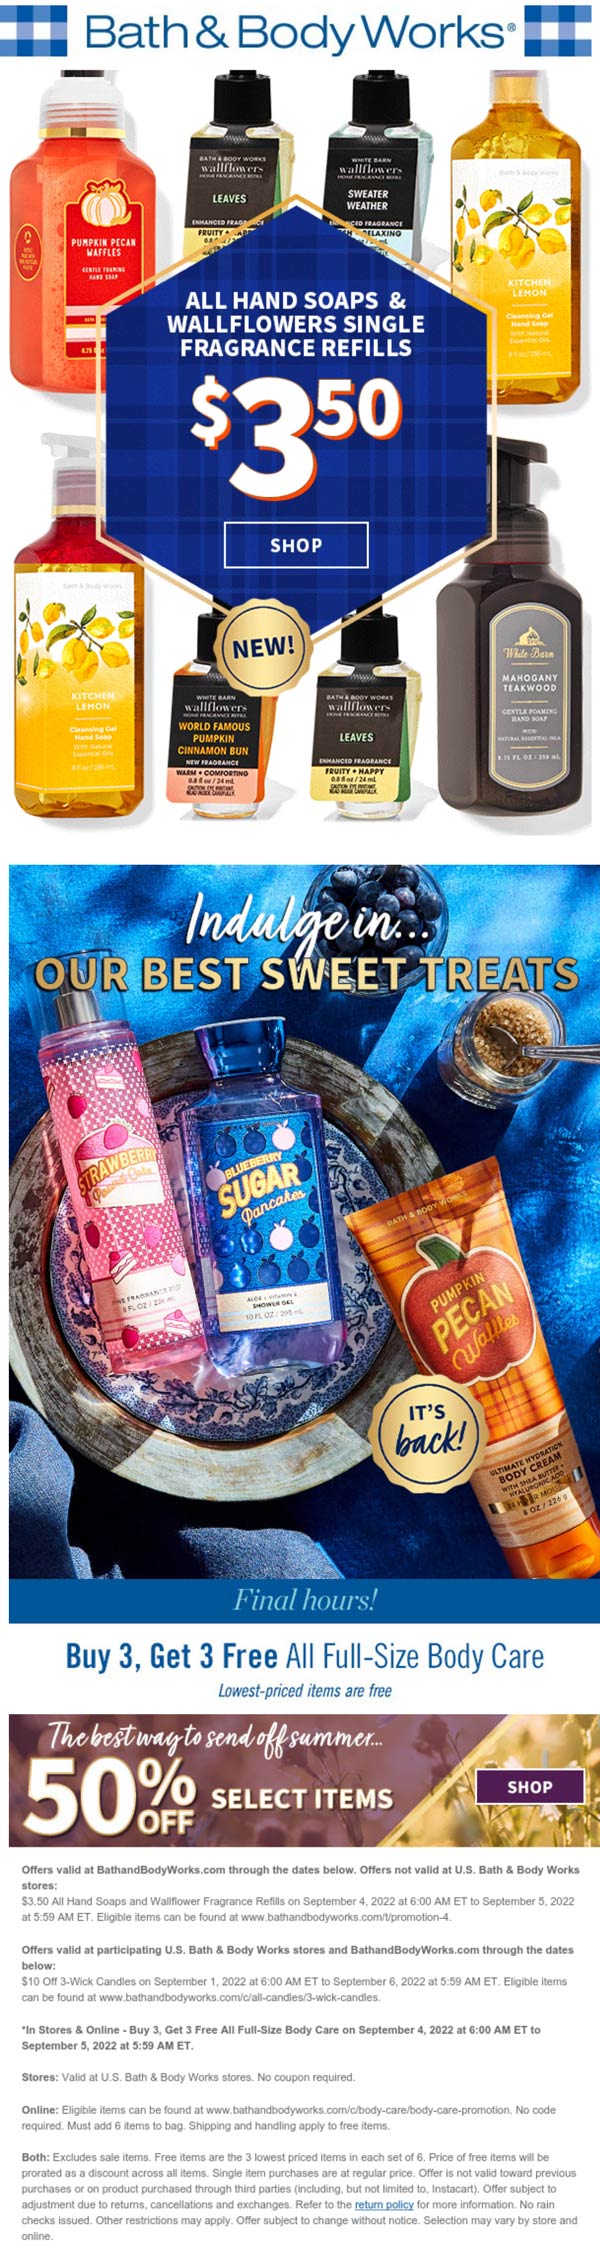 Bath & Body Works stores Coupon  $3.50 all hand soaps & more at Bath & Body Works, ditto online #bathbodyworks 